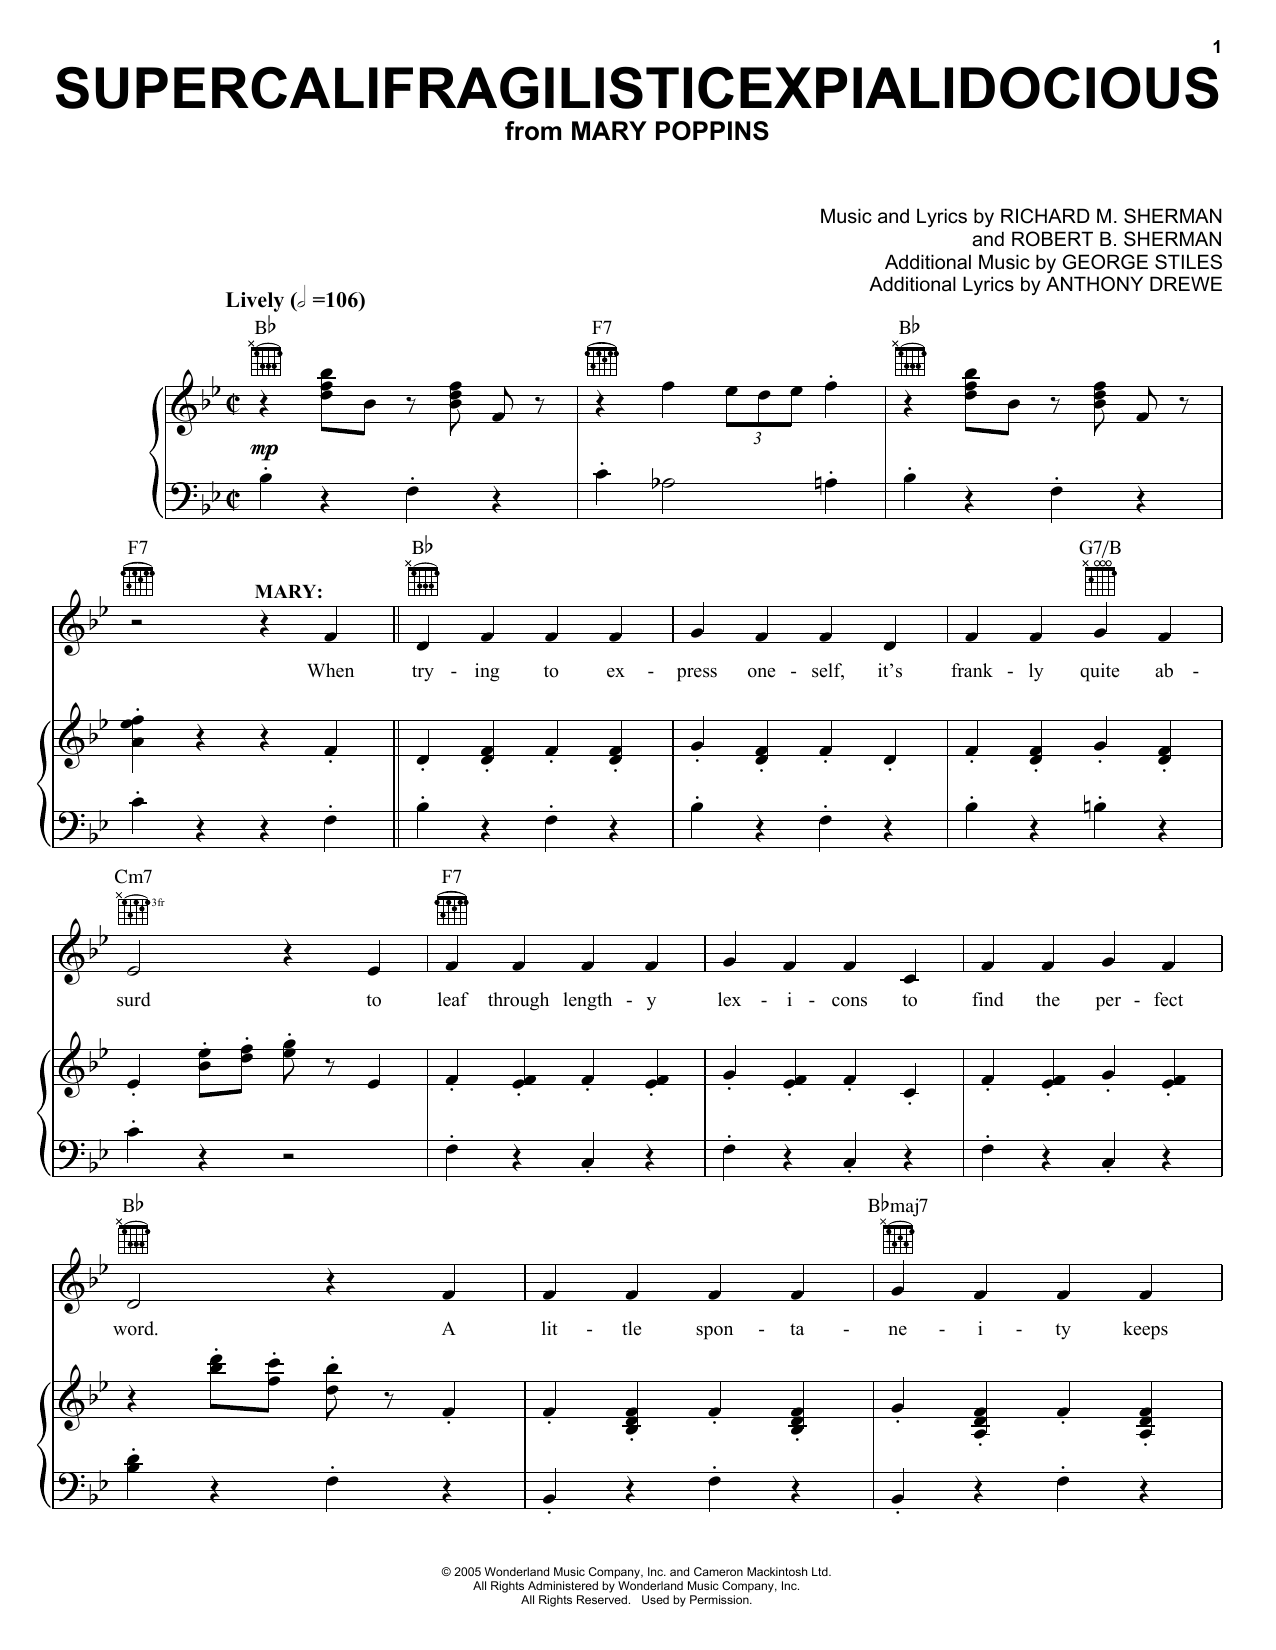 Sherman Brothers Supercalifragilisticexpialidocious (from Mary Poppins) sheet music notes printable PDF score